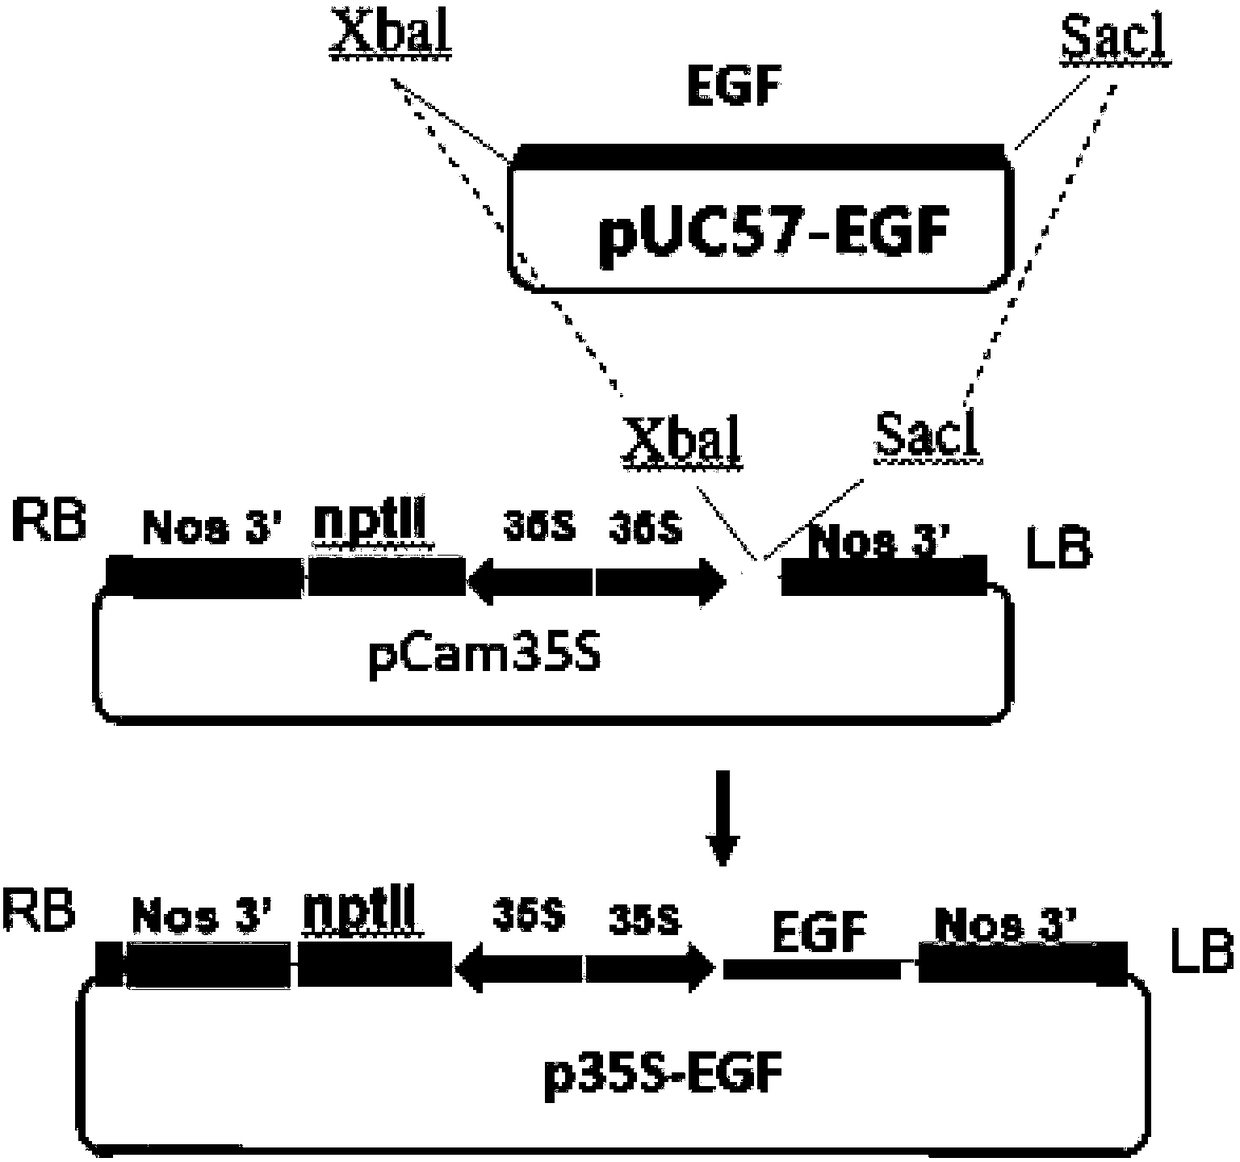 Application of plant serving as host in expressing epidermal growth factor